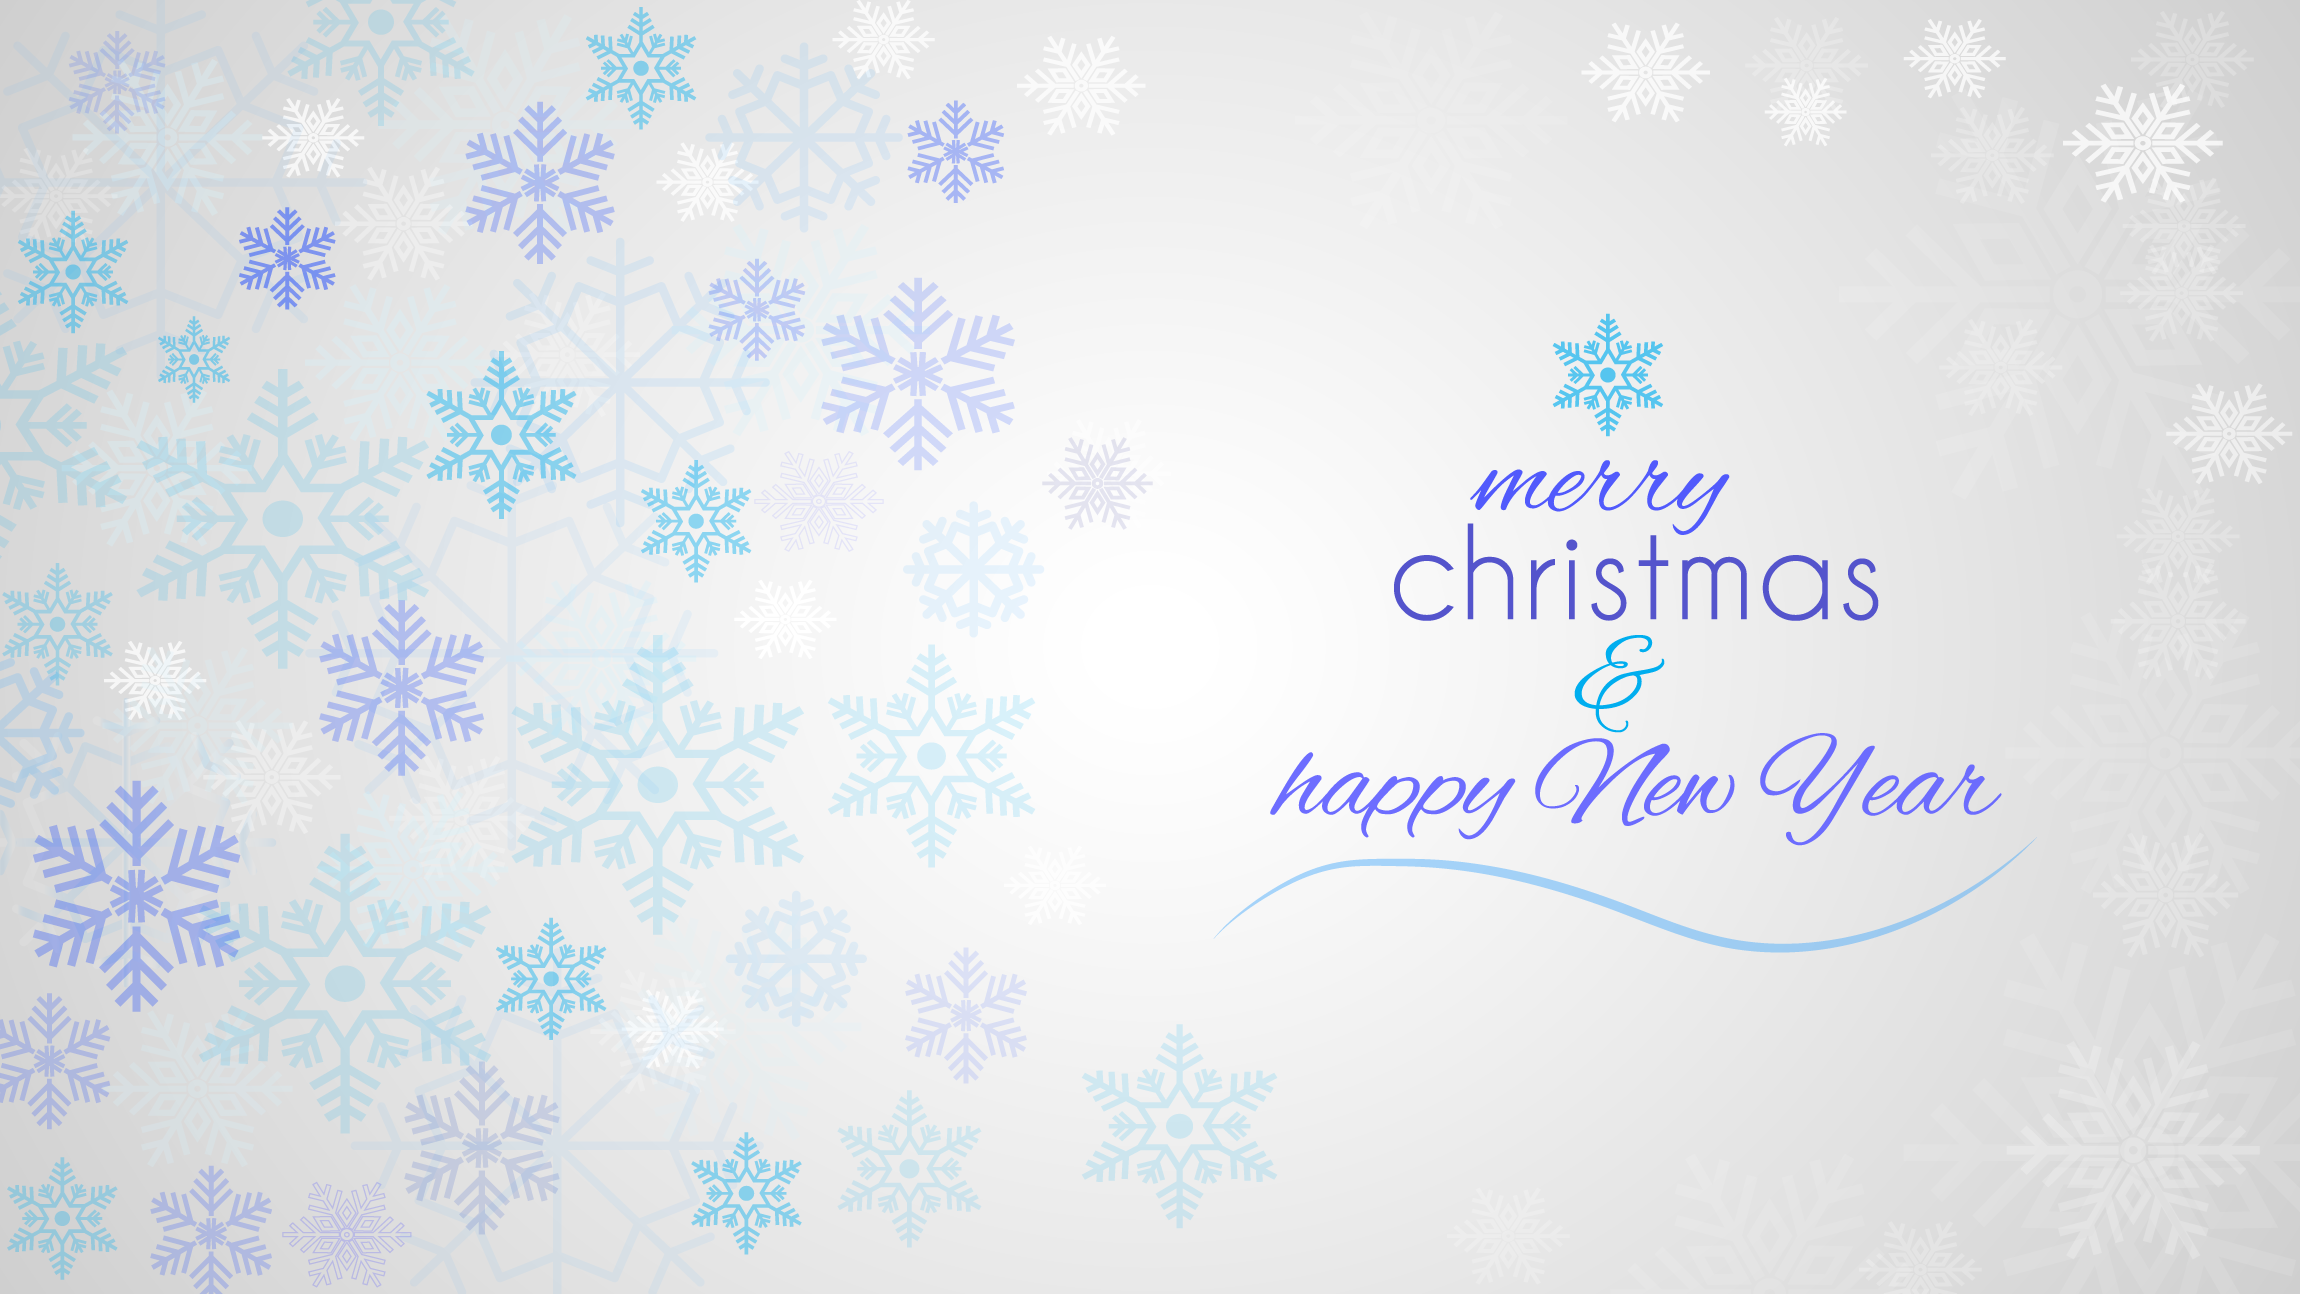 Merry Christmas And Happy New Year 2019 Banner - HD Wallpaper 